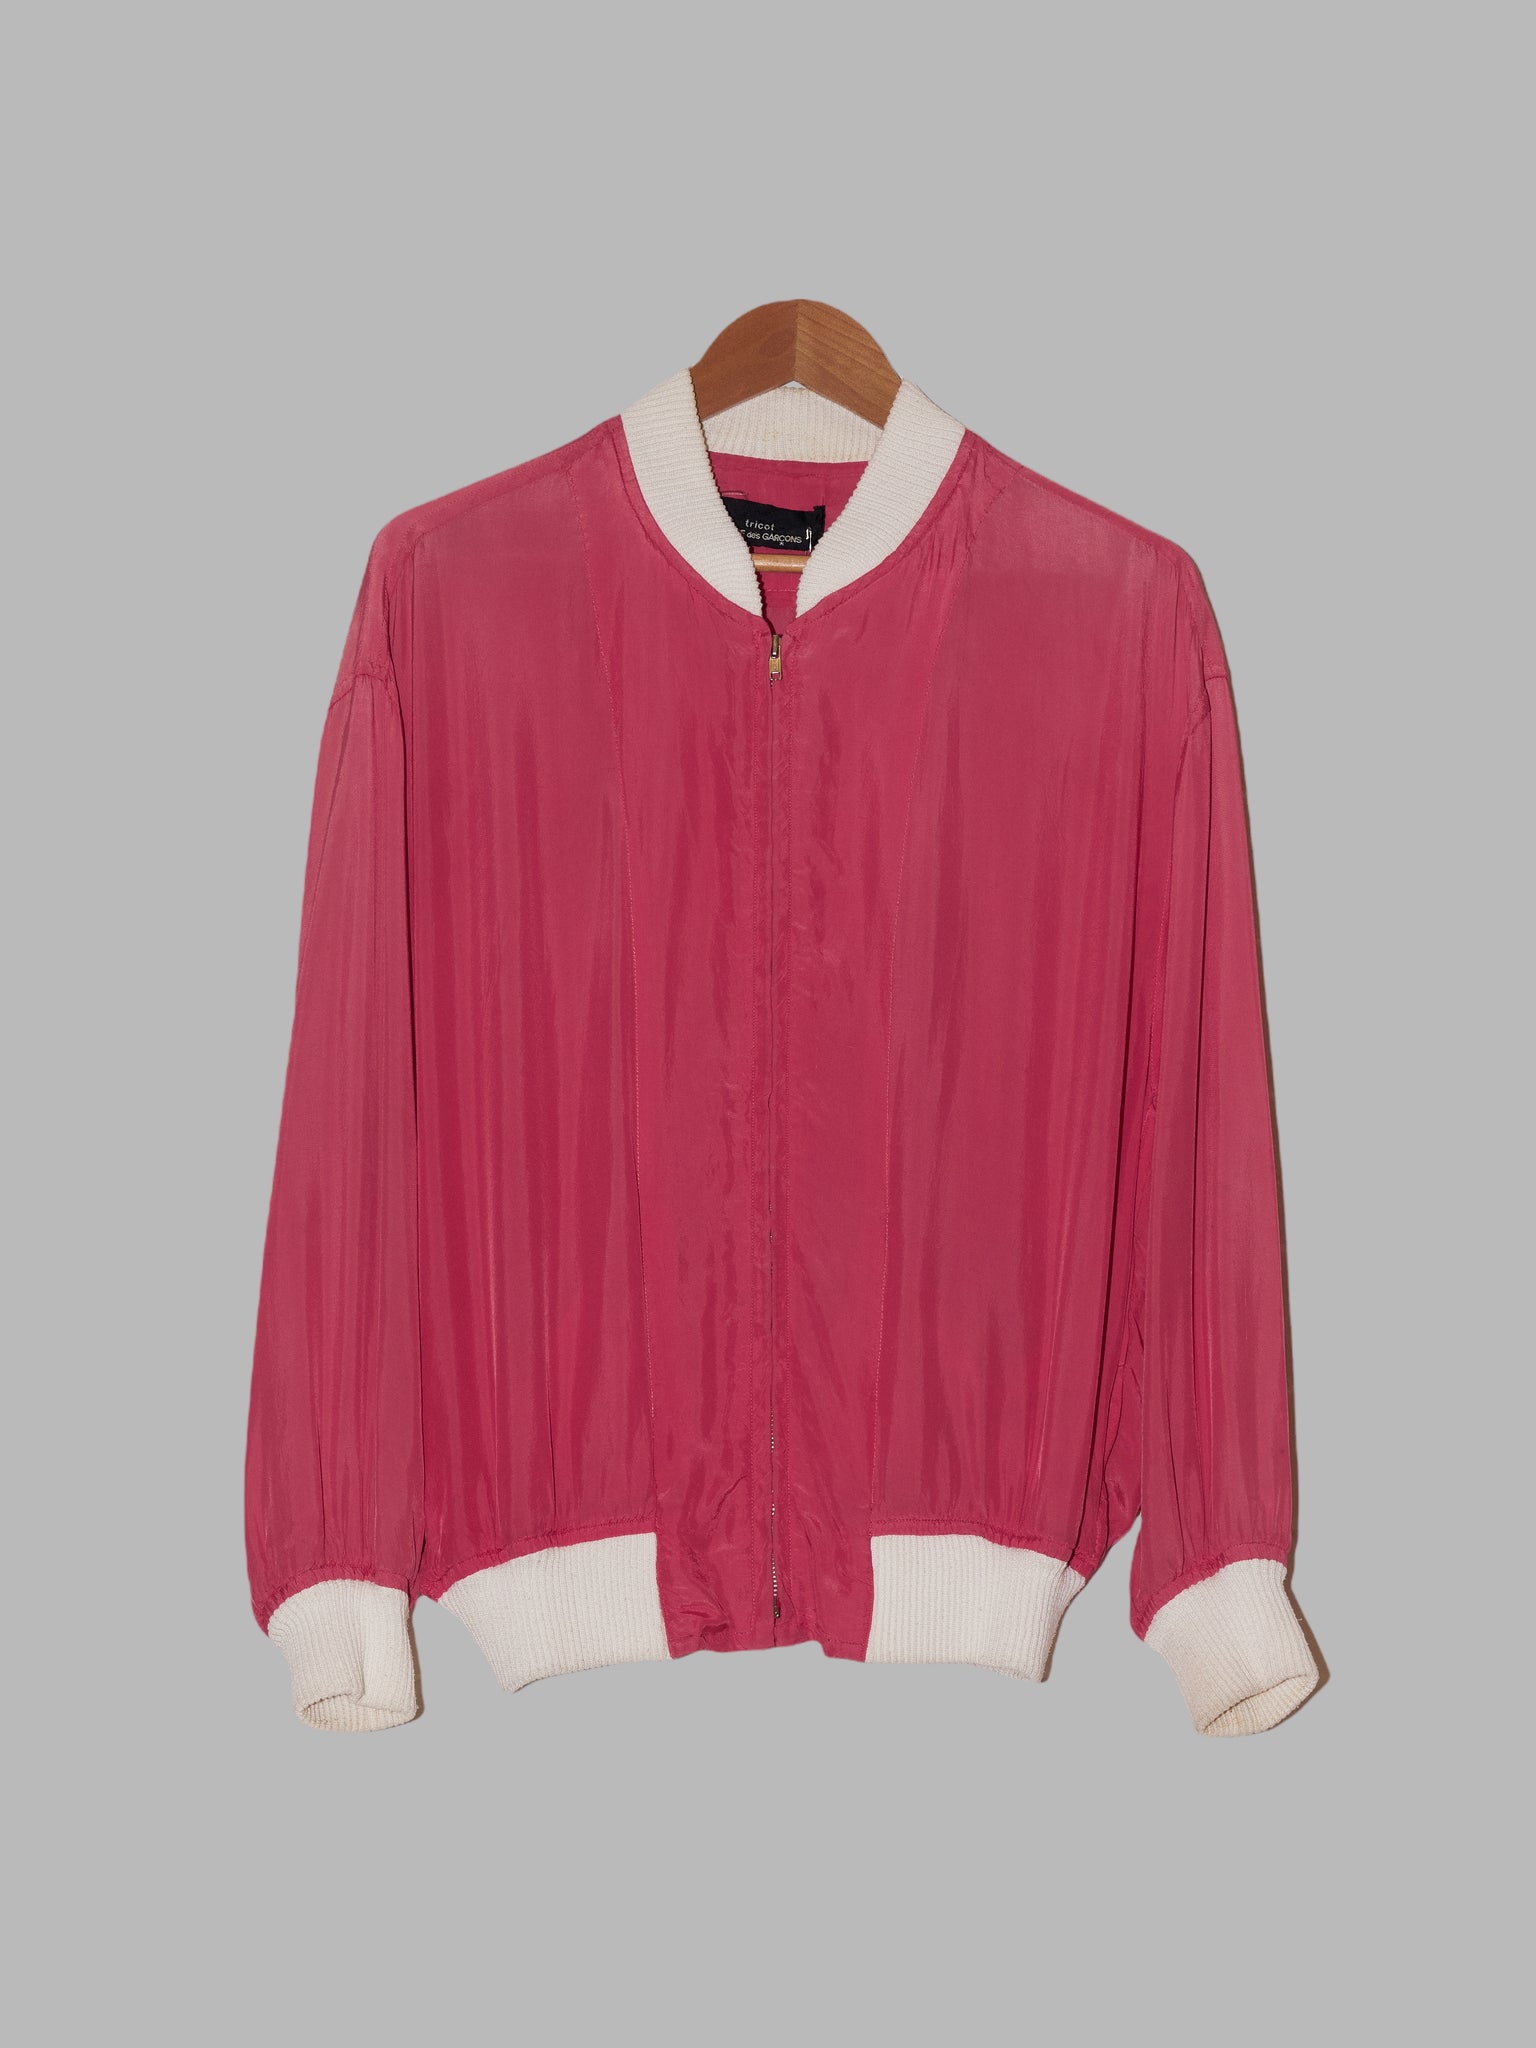 Tricot Comme des Garcons 1980s pink rayon bomber jacket